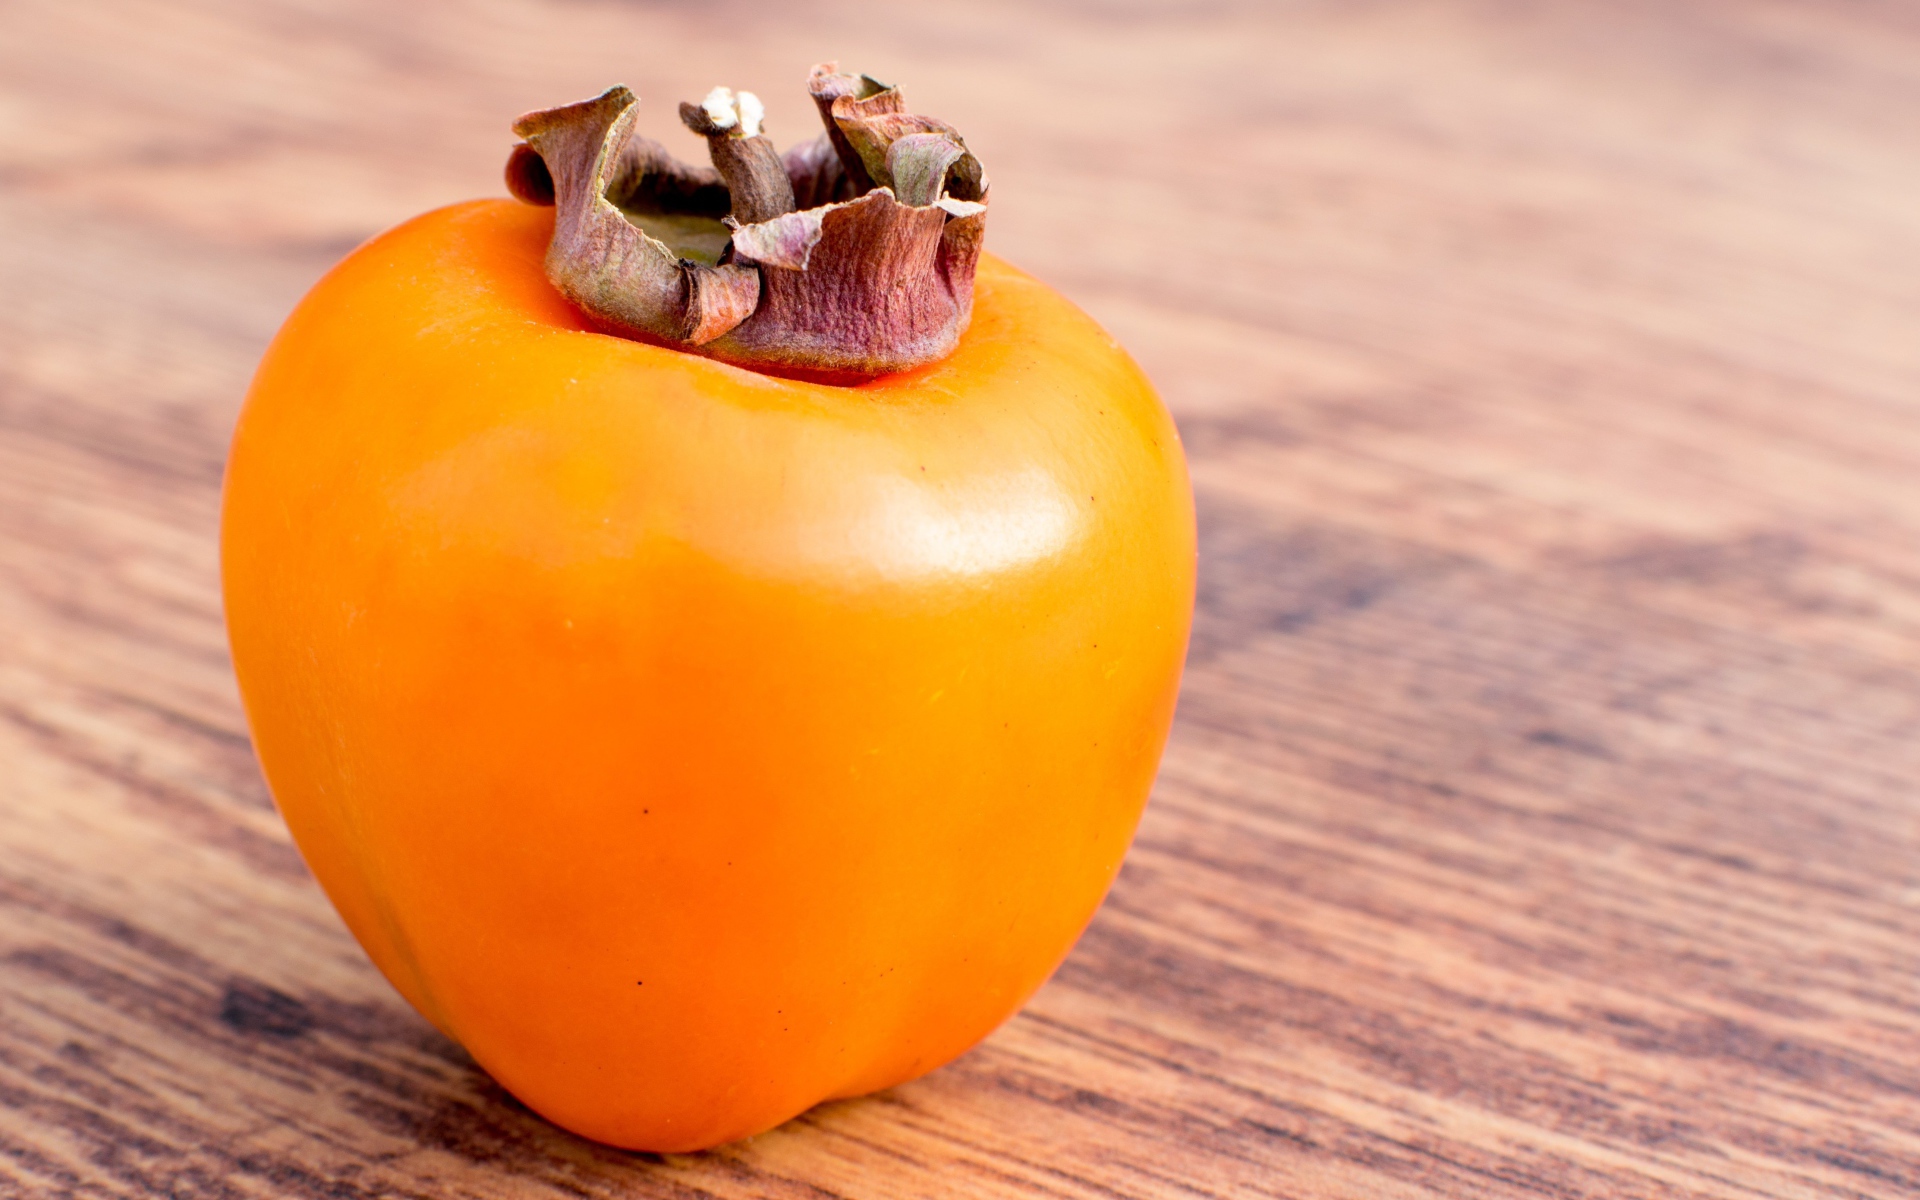 Ripe juicy persimmon on the table